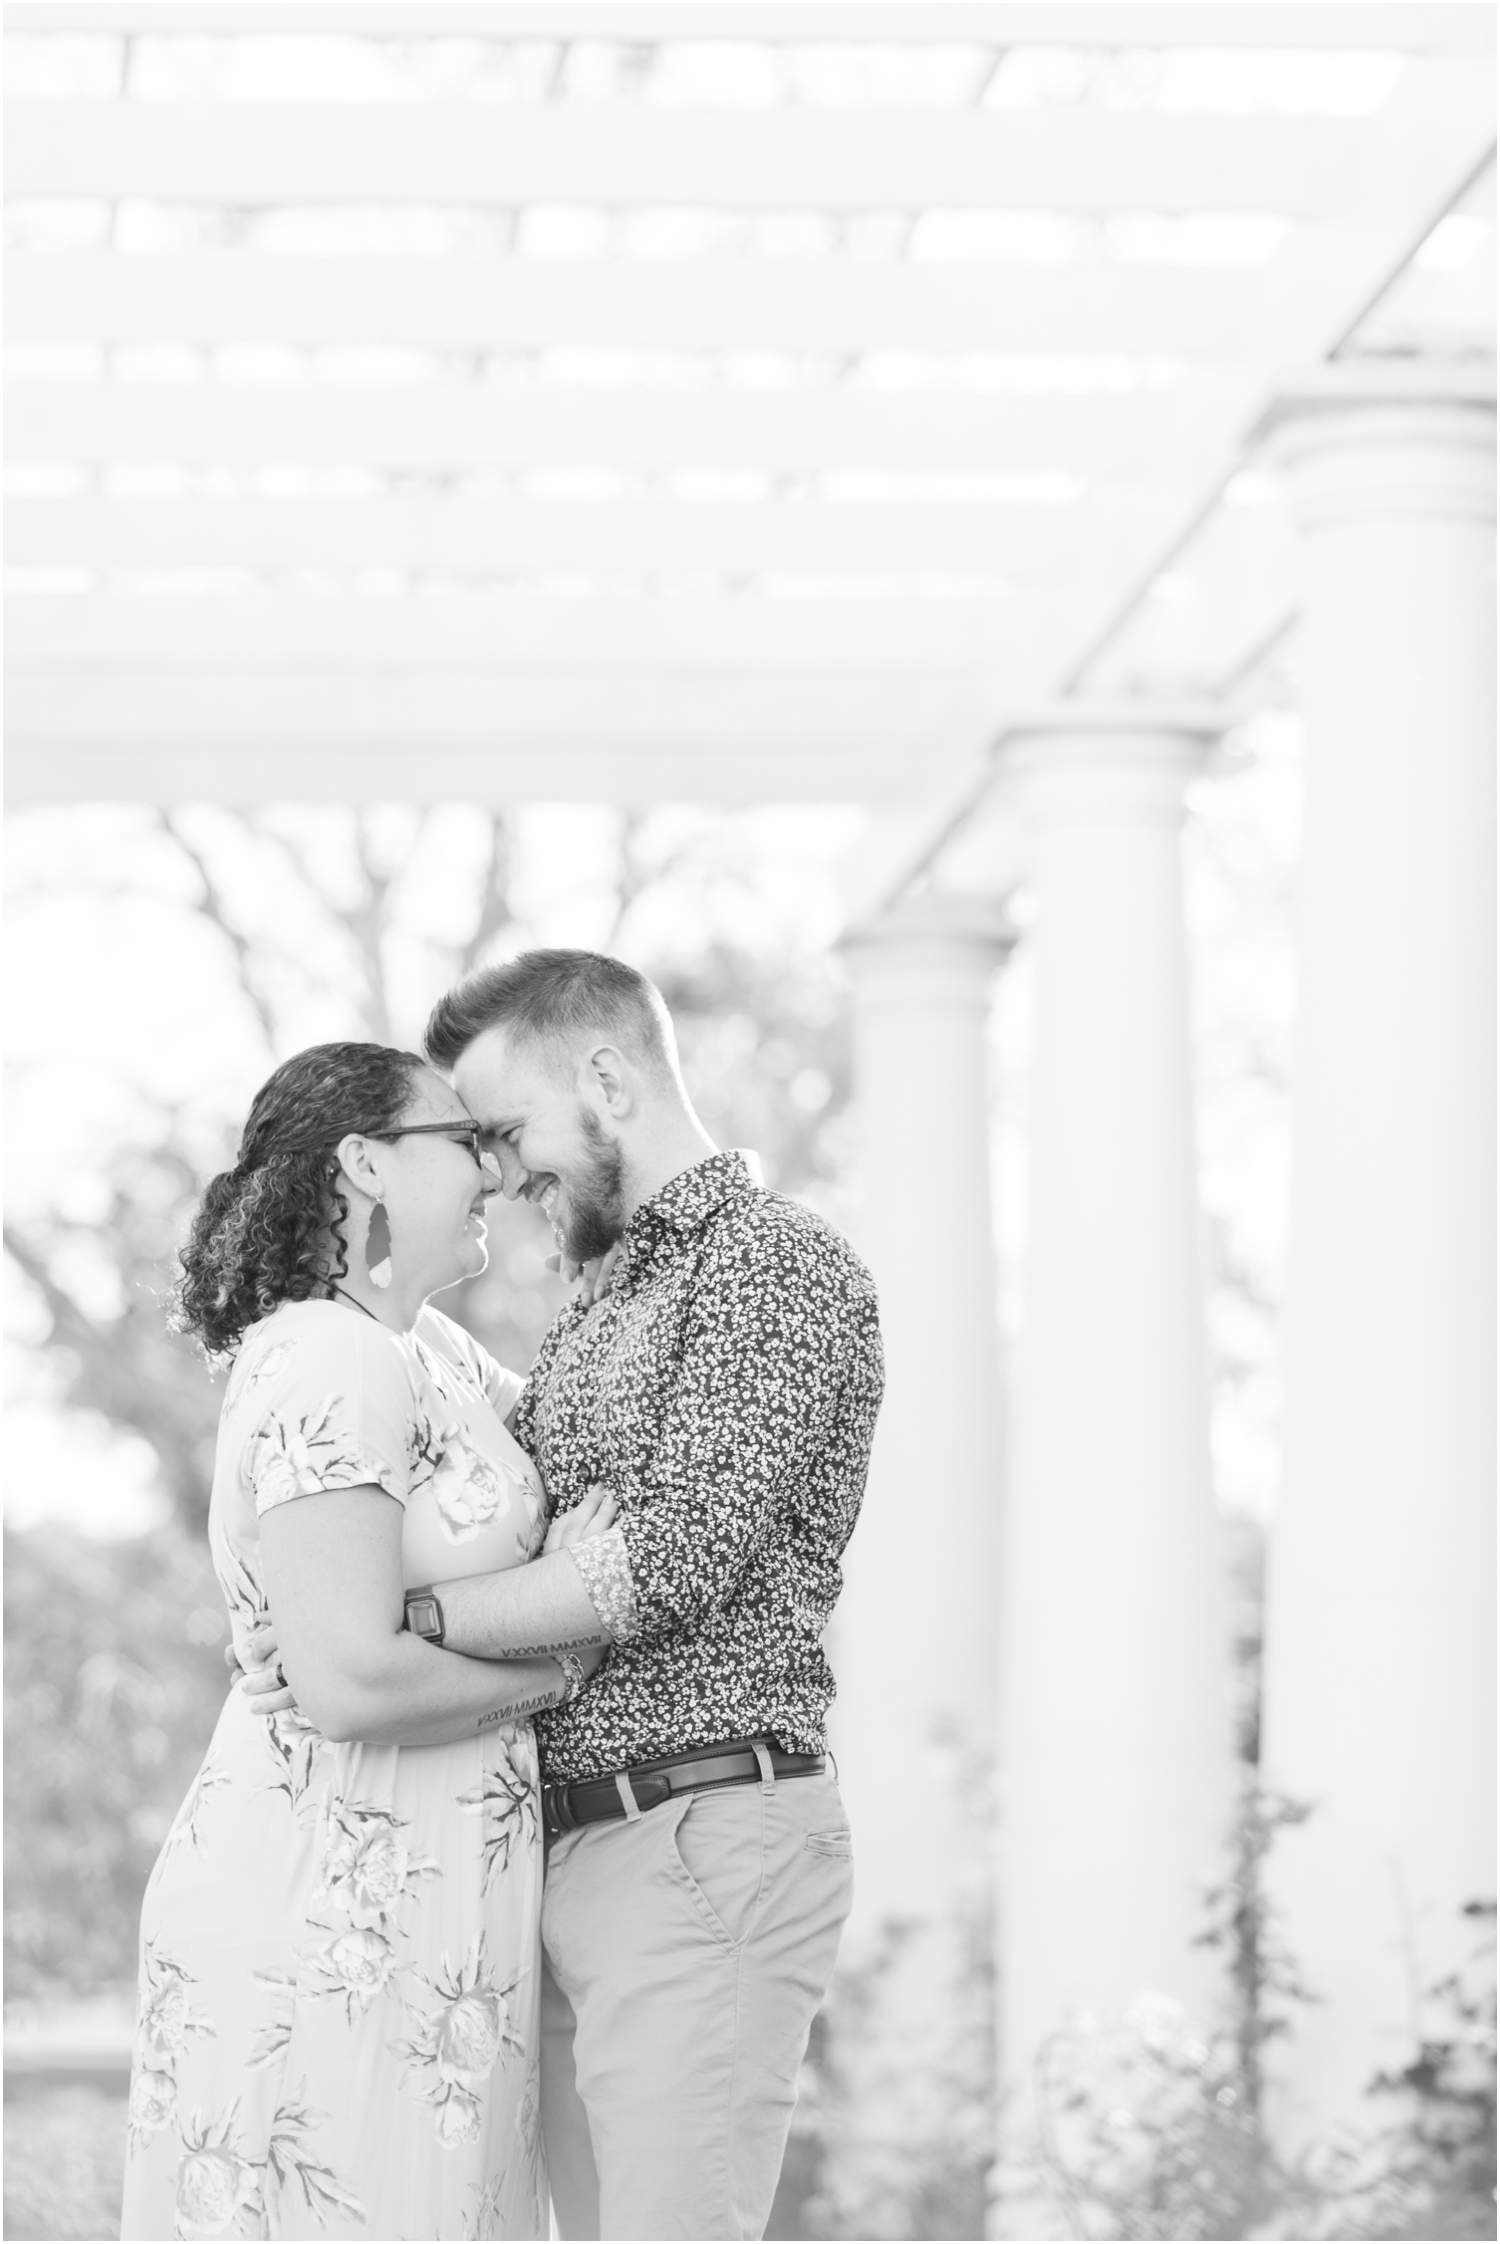 Rose Courts Photography Fort Wayne Indianapolis Indiana Wedding Photographer Engagement Photography